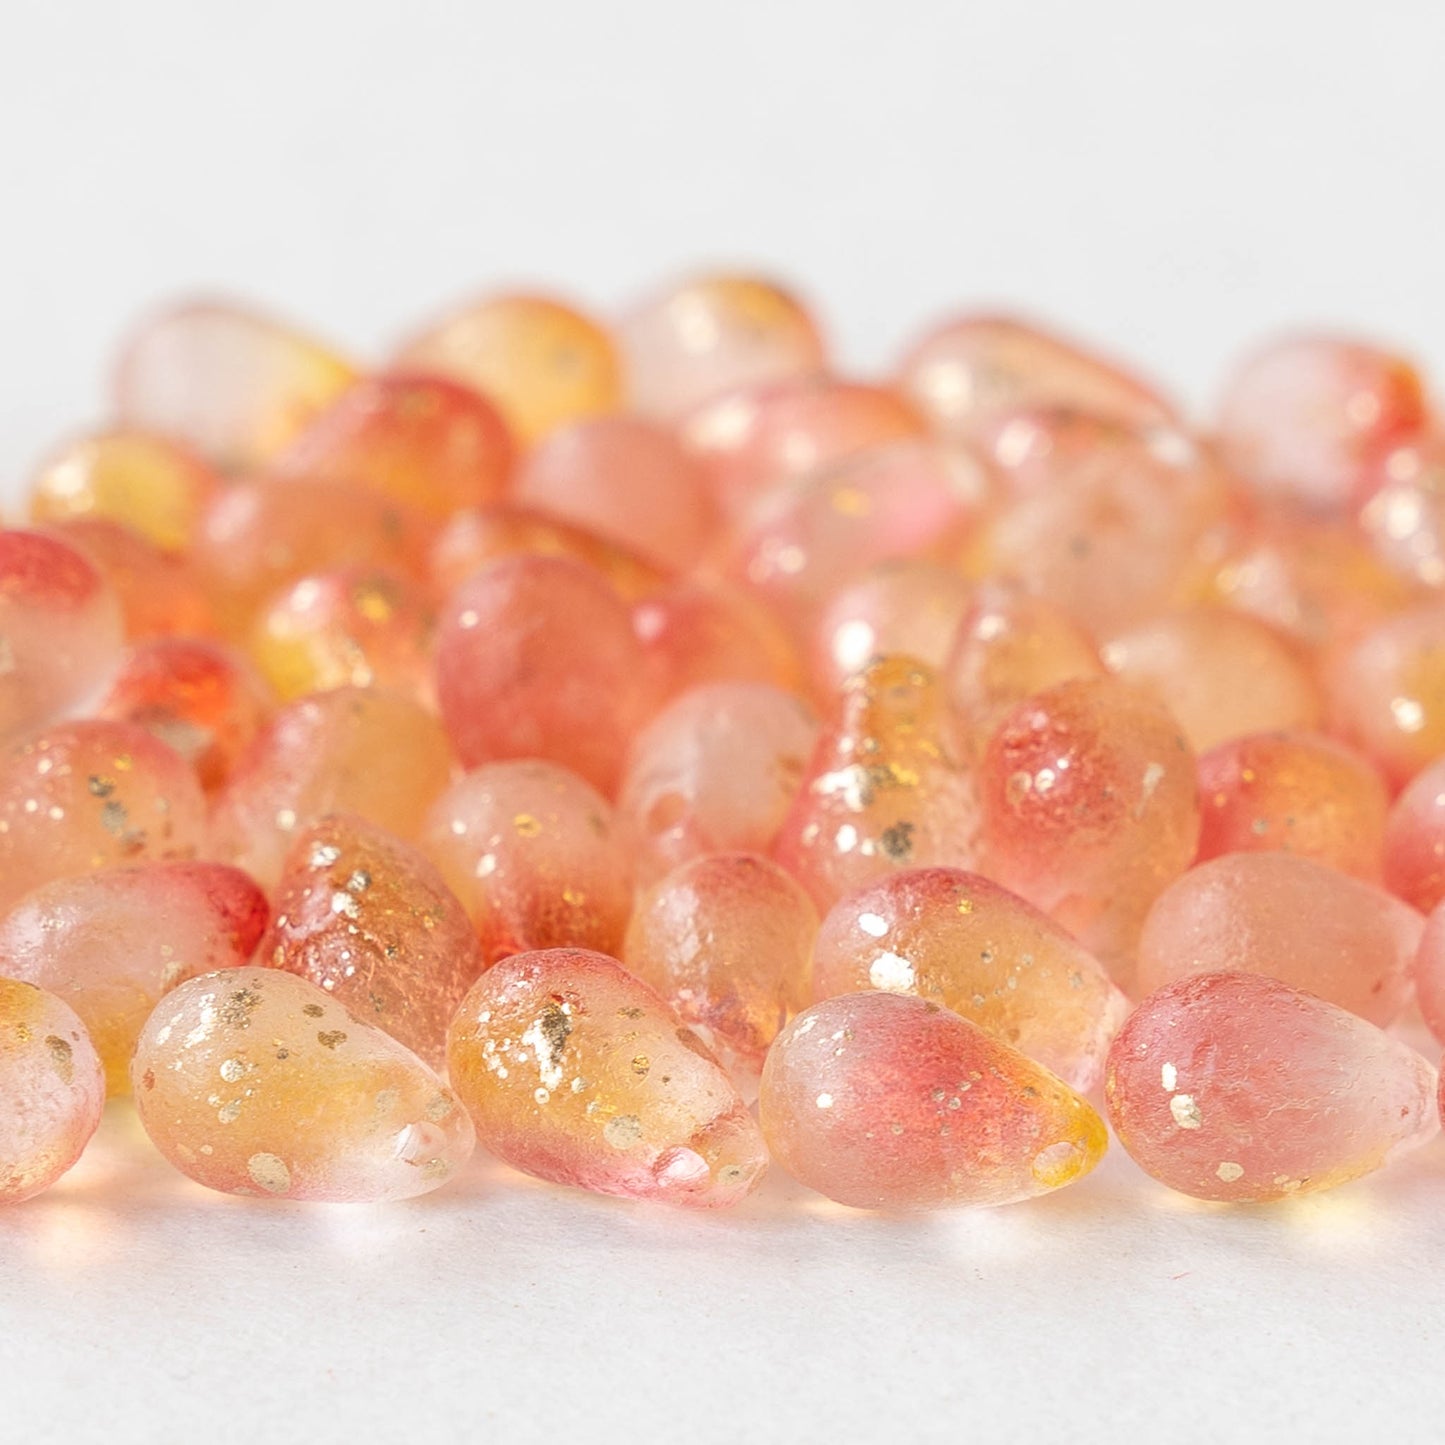 6x9mm Glass Teardrop Beads - Peachy Pink with Gold Dust - 50 Beads